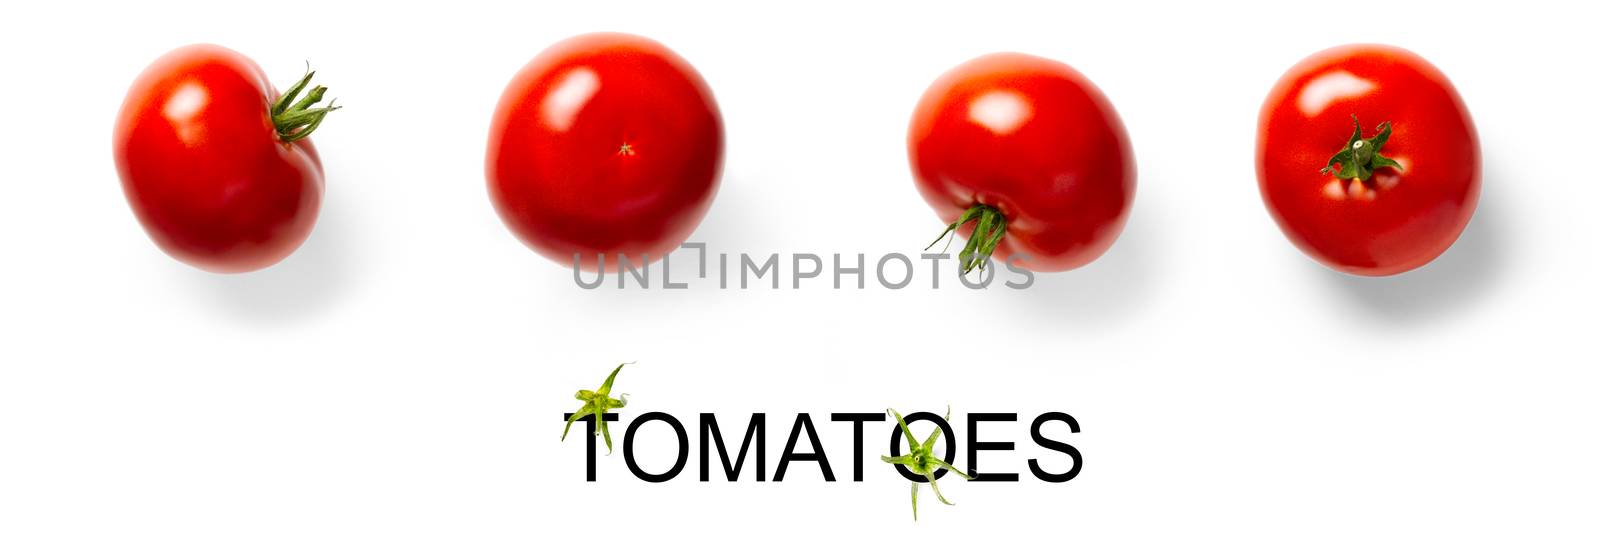 Creative wide layout made of tomato on the white background. Creative flat lay set of tomatoes with simple text on white background banner, copy space. tomato theme decoration design or vegetarianism concept.